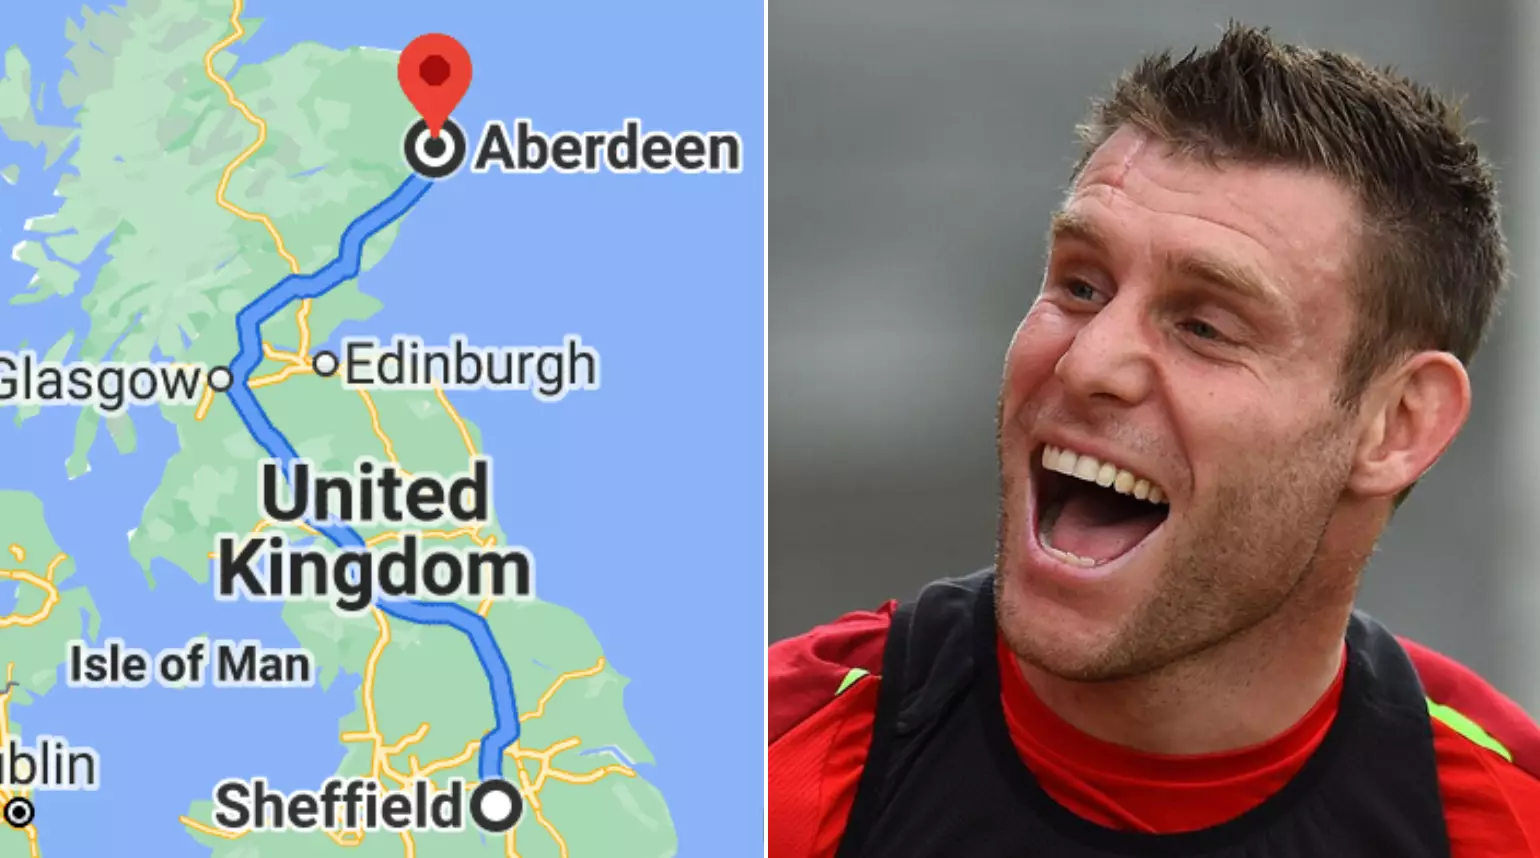 Manchester United Fan Pranked By Rival Supporters Into Driving 400 Miles To Meet Woman